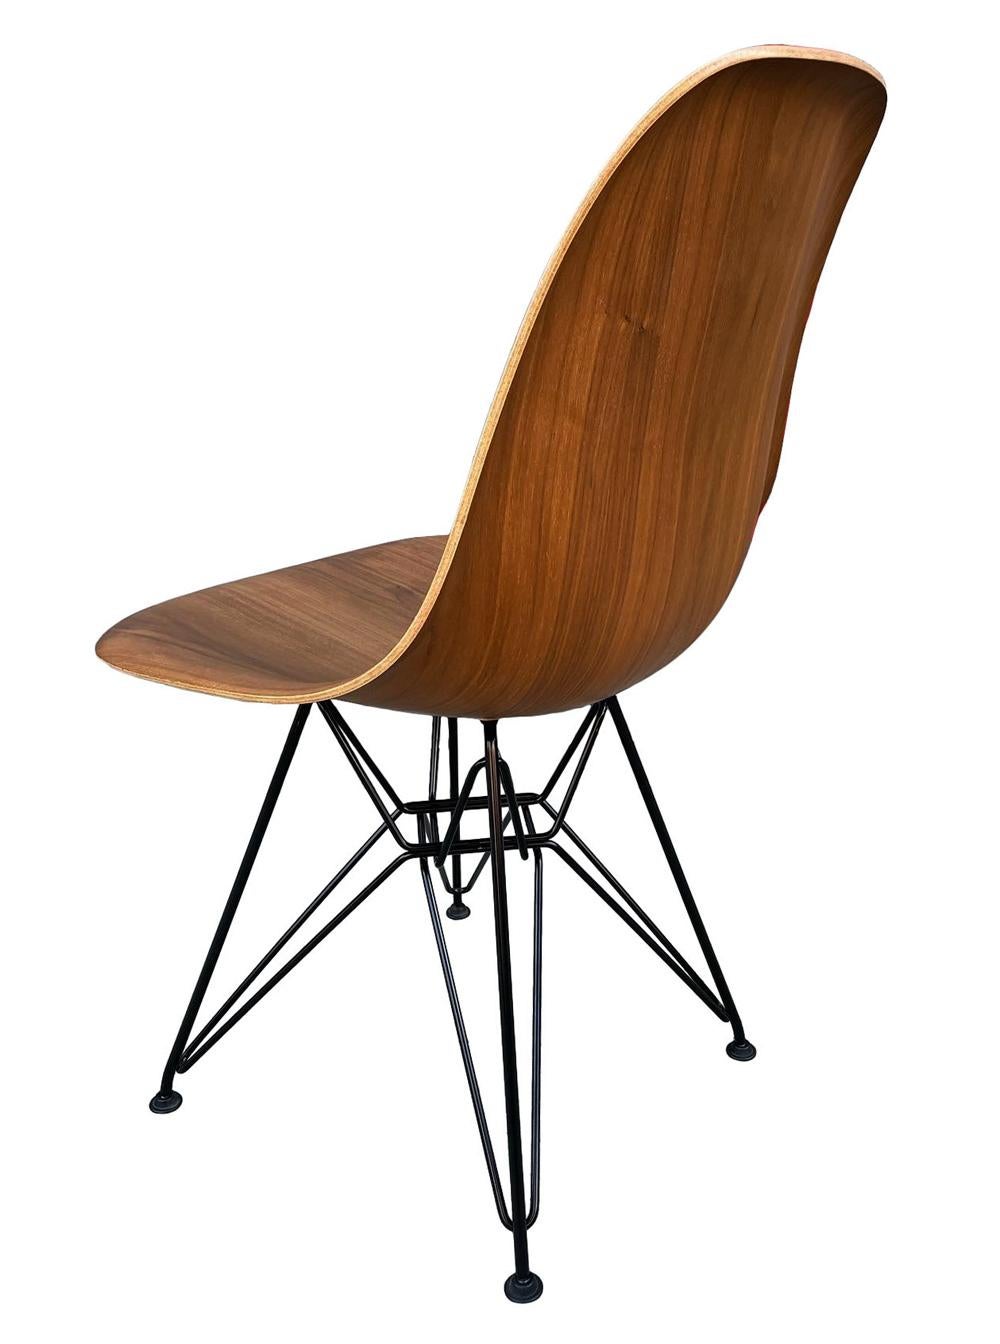 American Set of 8 Mid-Century Modern Walnut Wood Shell Dining Chairs by Charles Eames For Sale